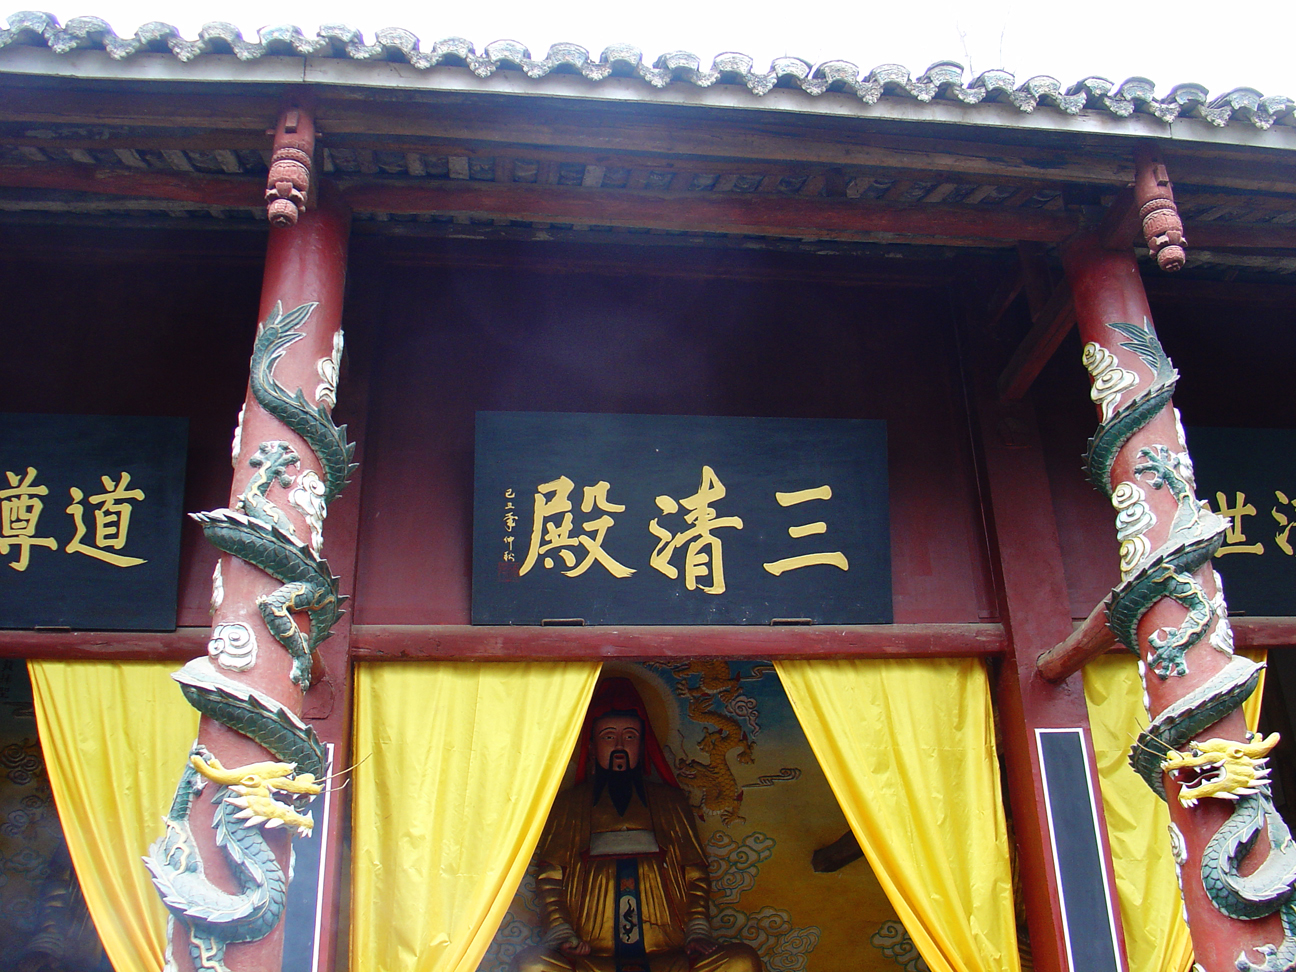 The entrance to the statue hall